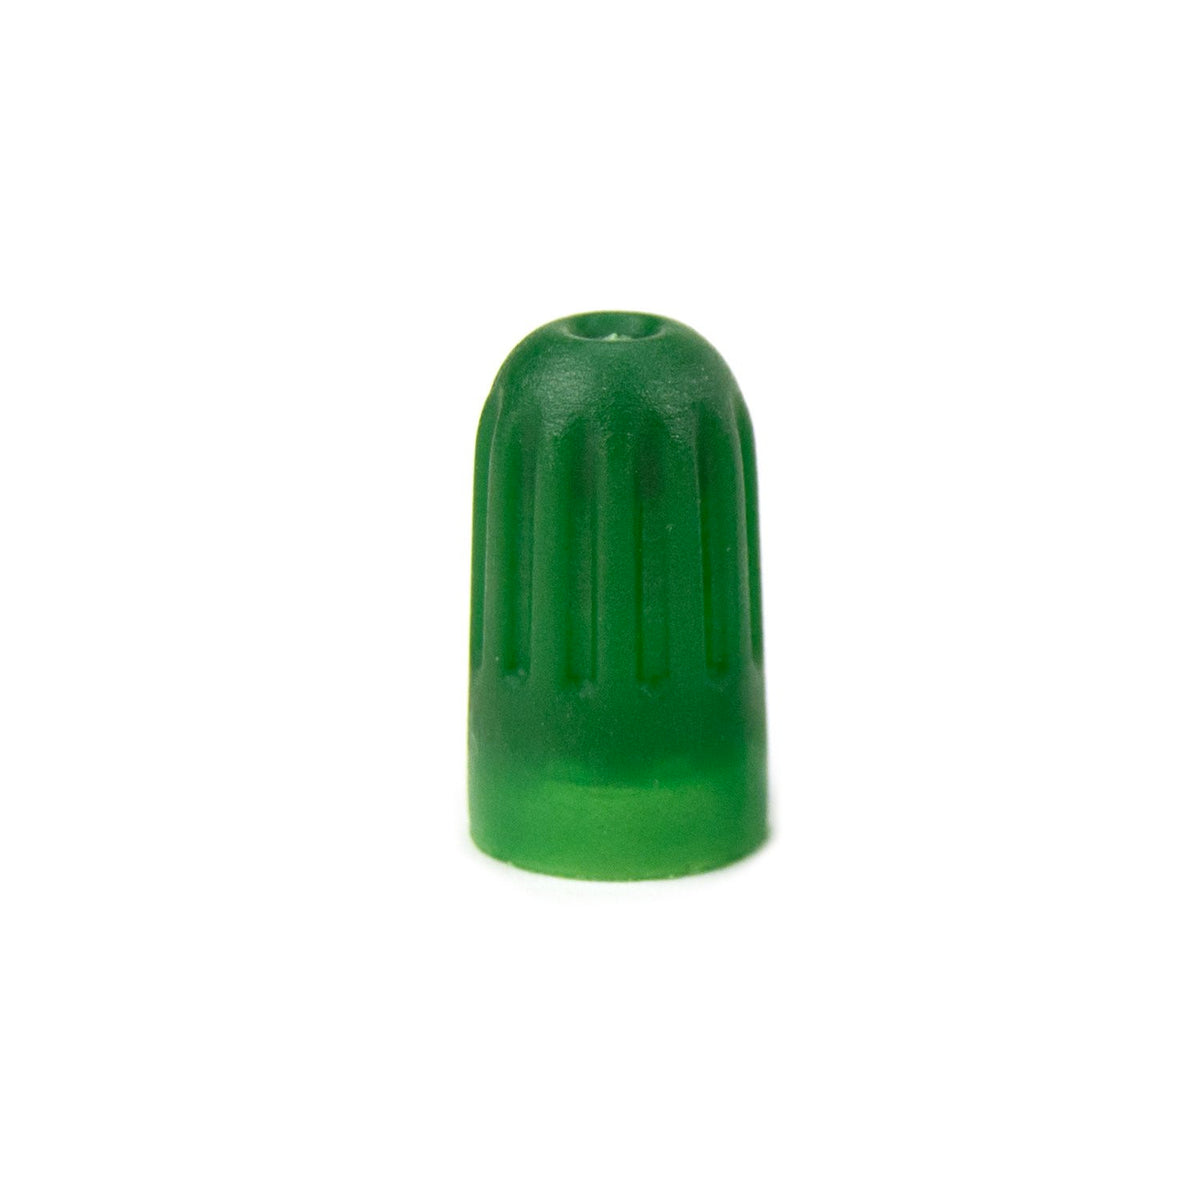 Plastic Valve Cap with Seal, Long Green (100 Pack)